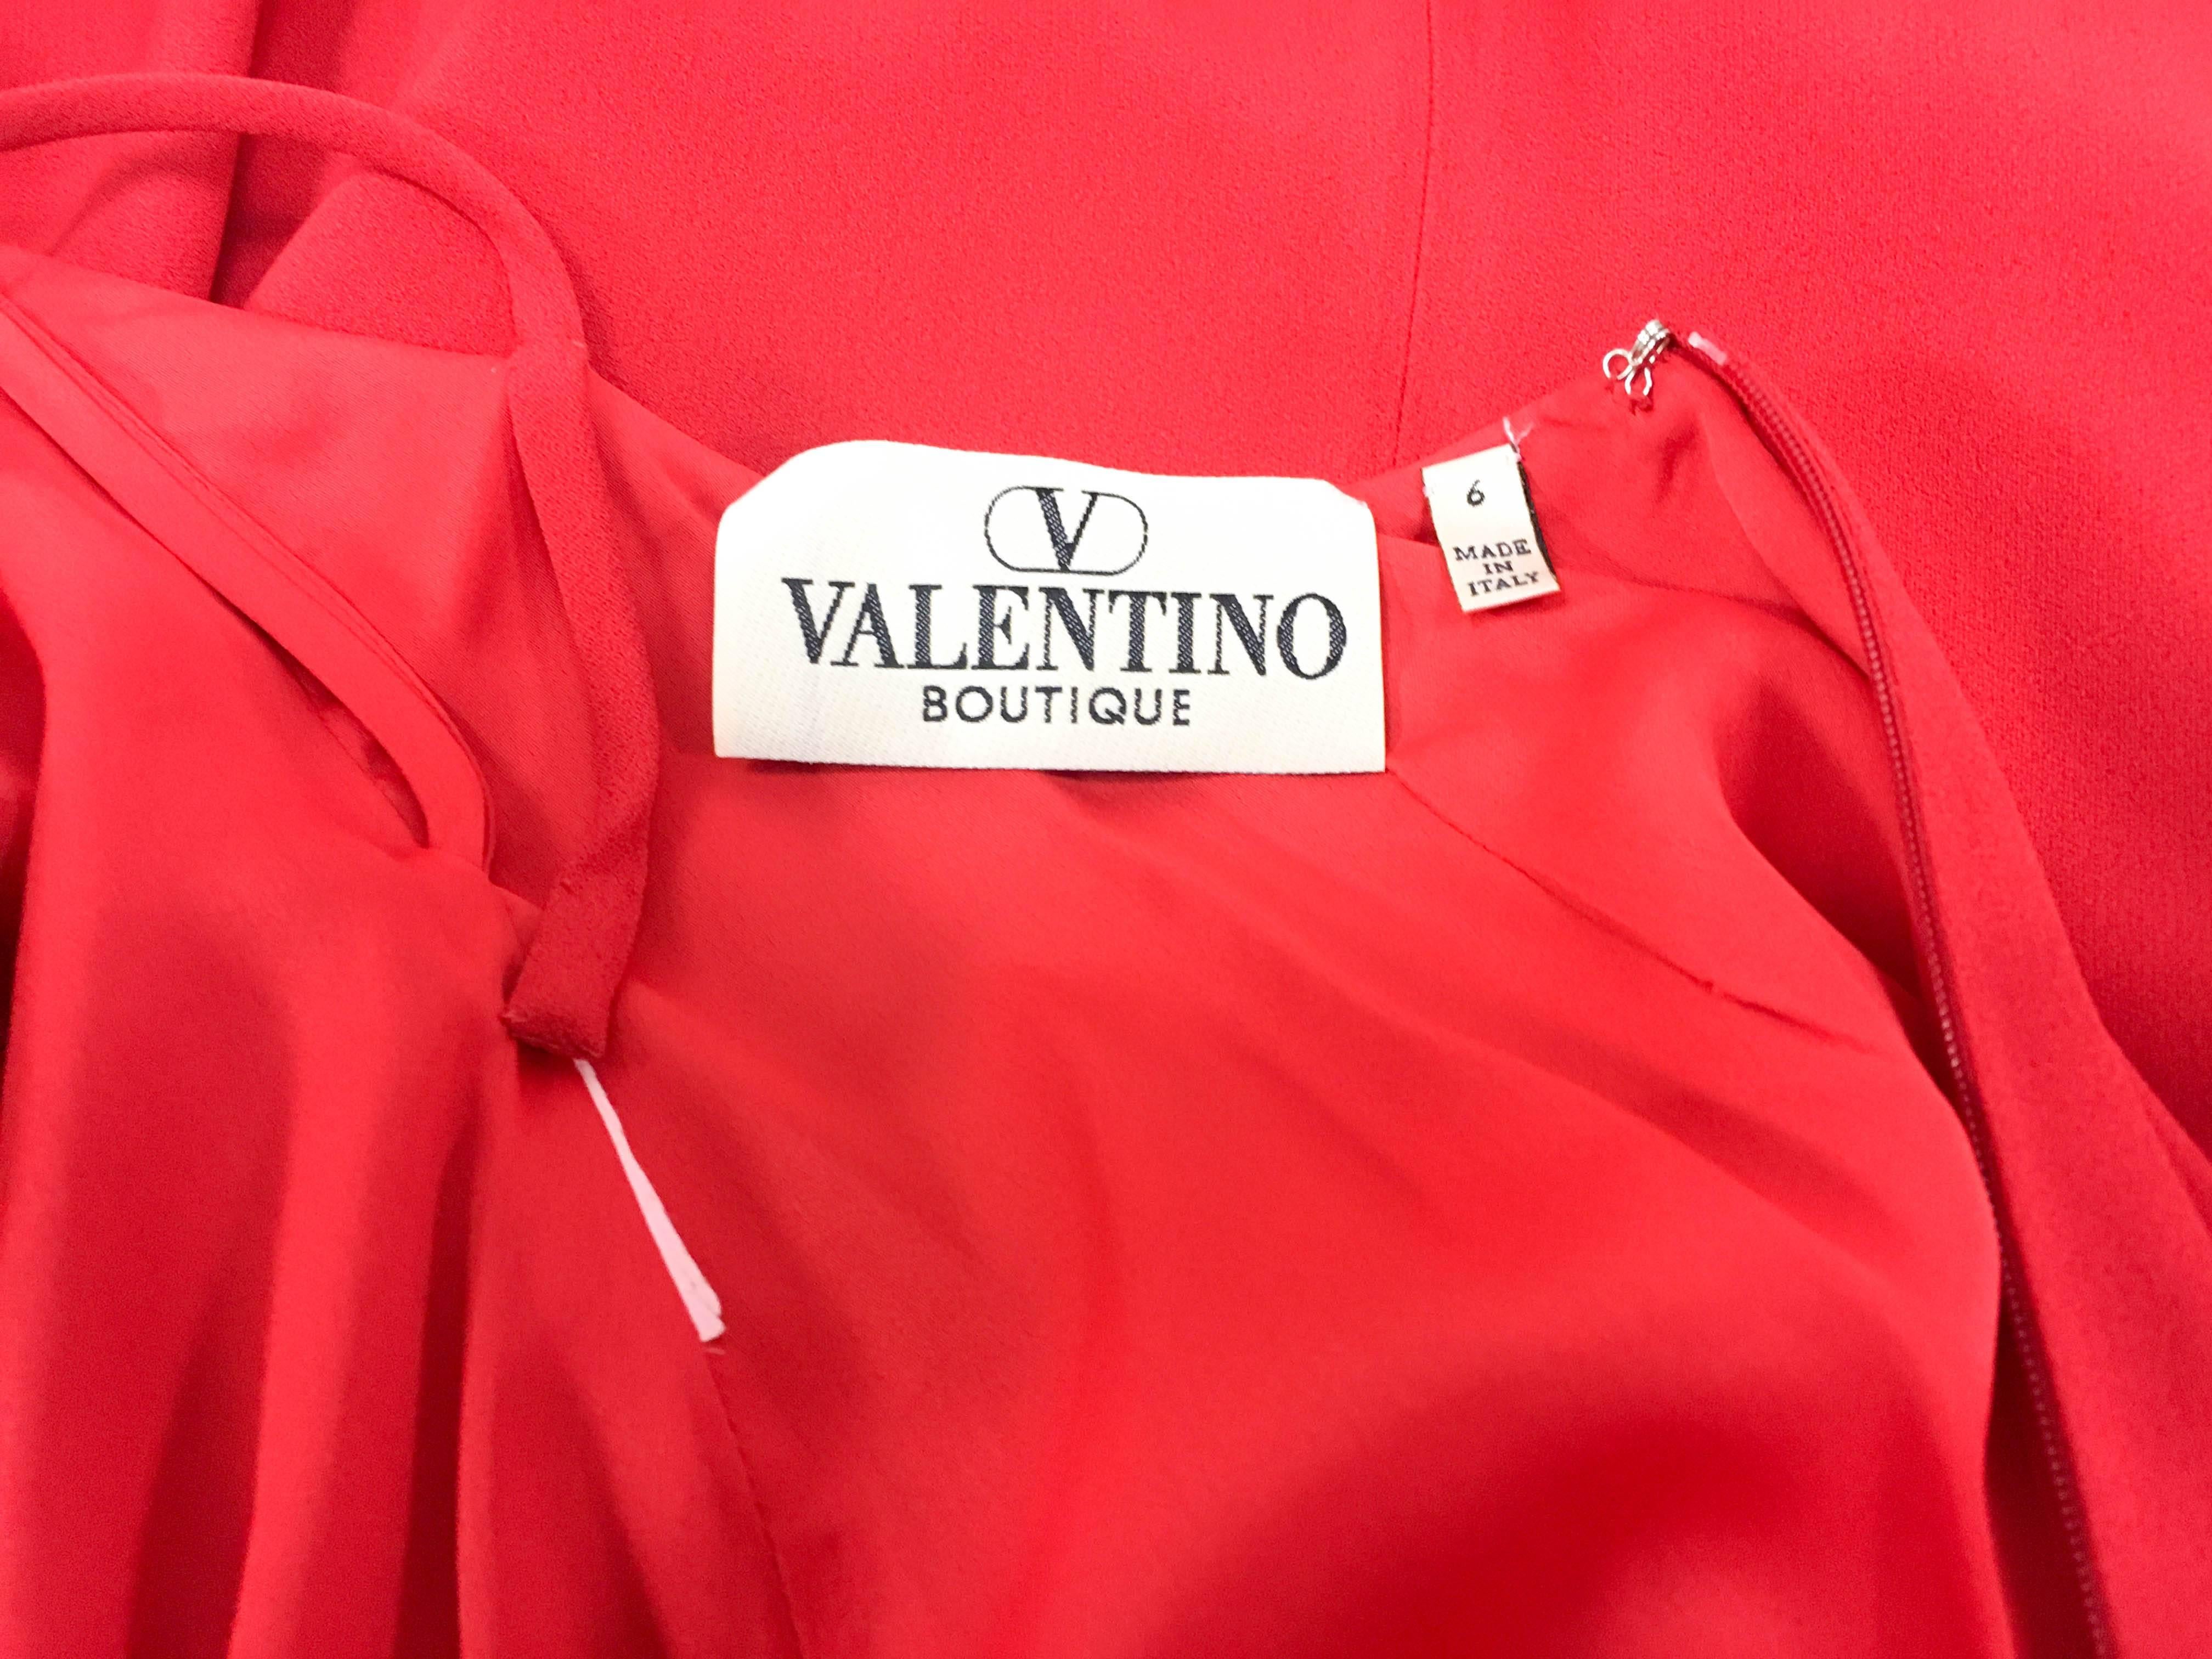 1980's Valentino Flamenco-Inspired Red Silk Evening Gown For Sale 7